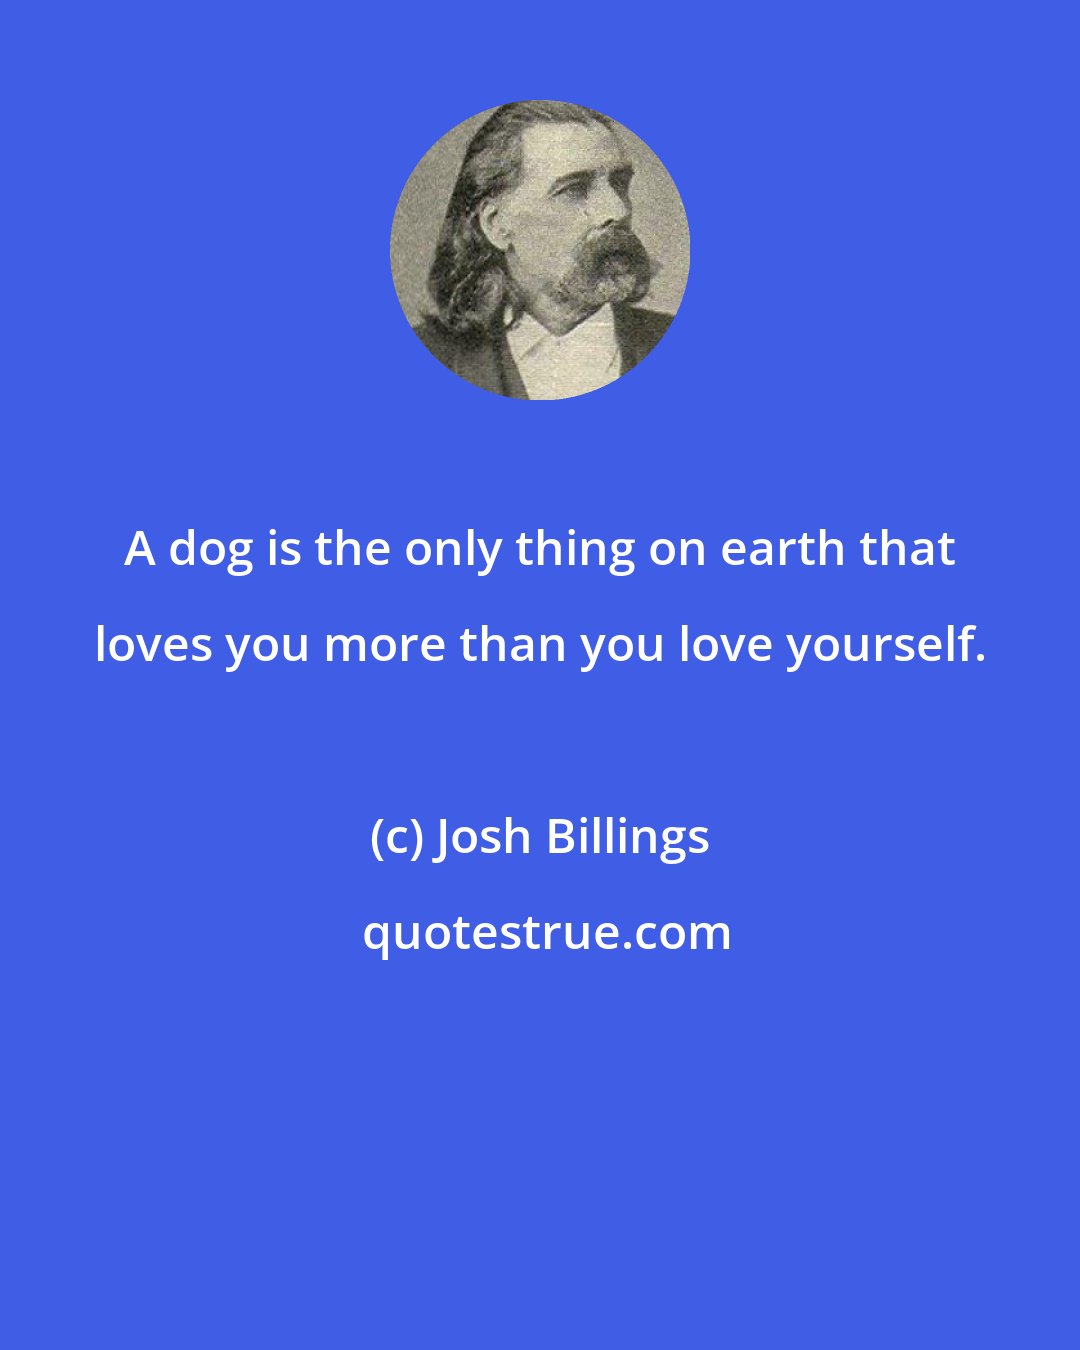 Josh Billings: A dog is the only thing on earth that loves you more than you love yourself.